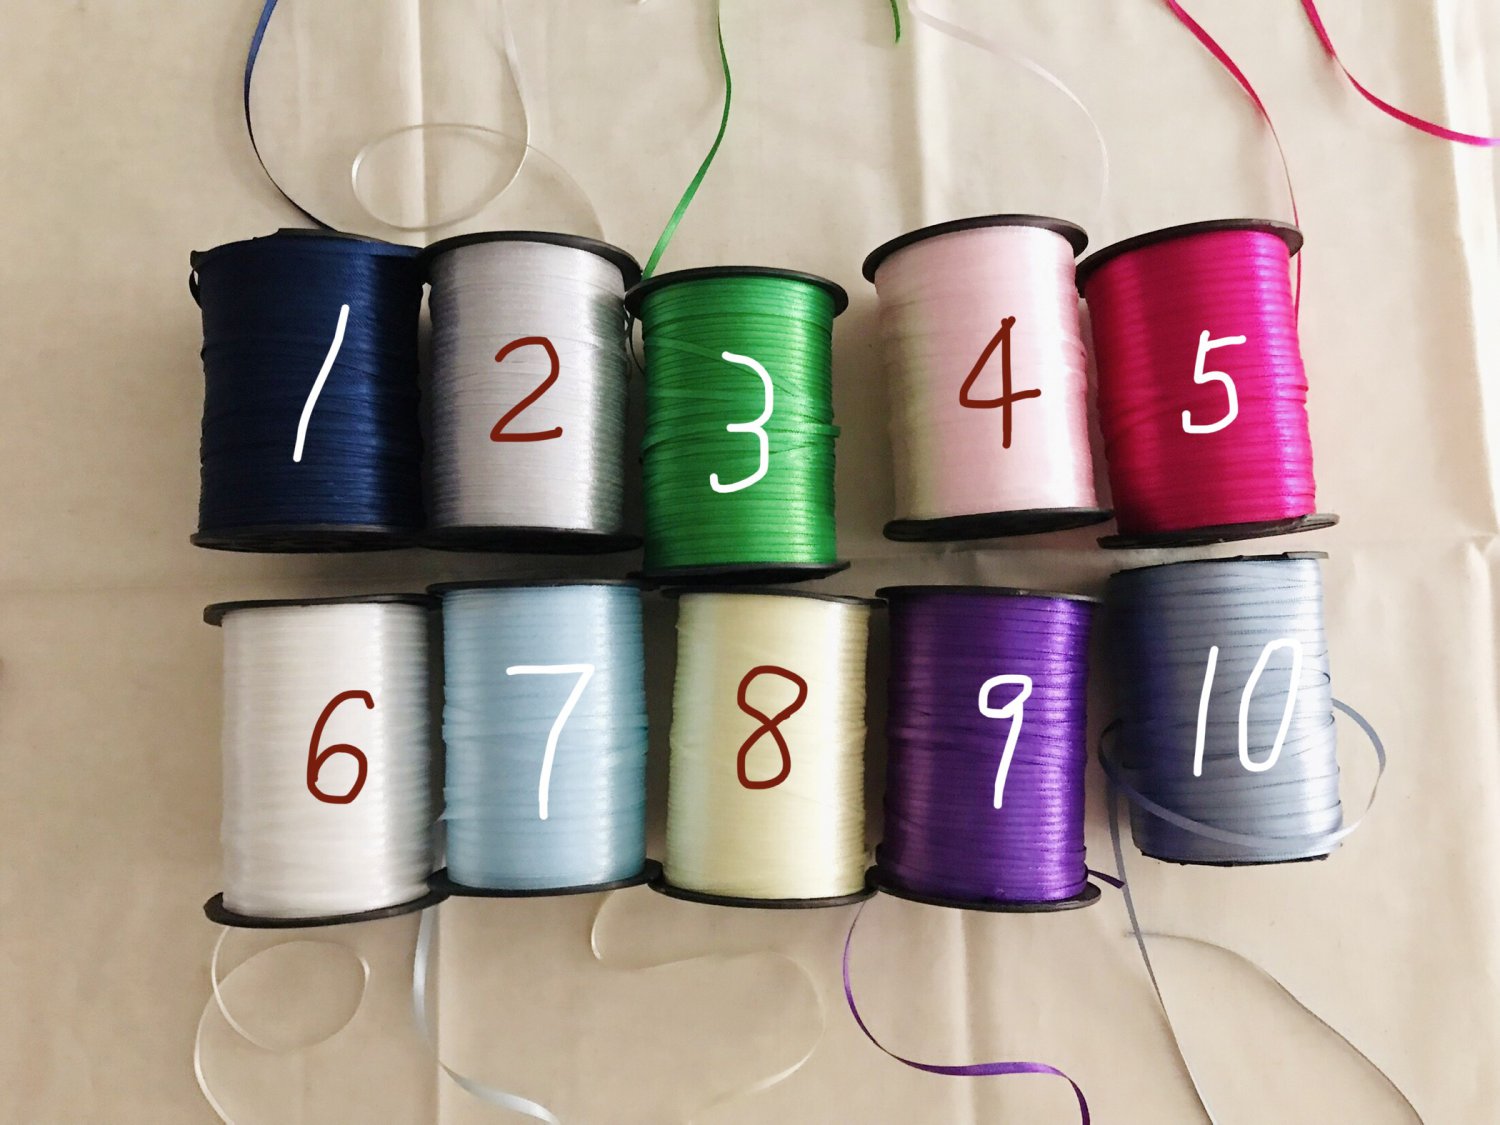 10 yds 0.12" Band Ribbon Trim - Choose 1 from 10 colours ï½� Fast Delivery as Air Lettermail